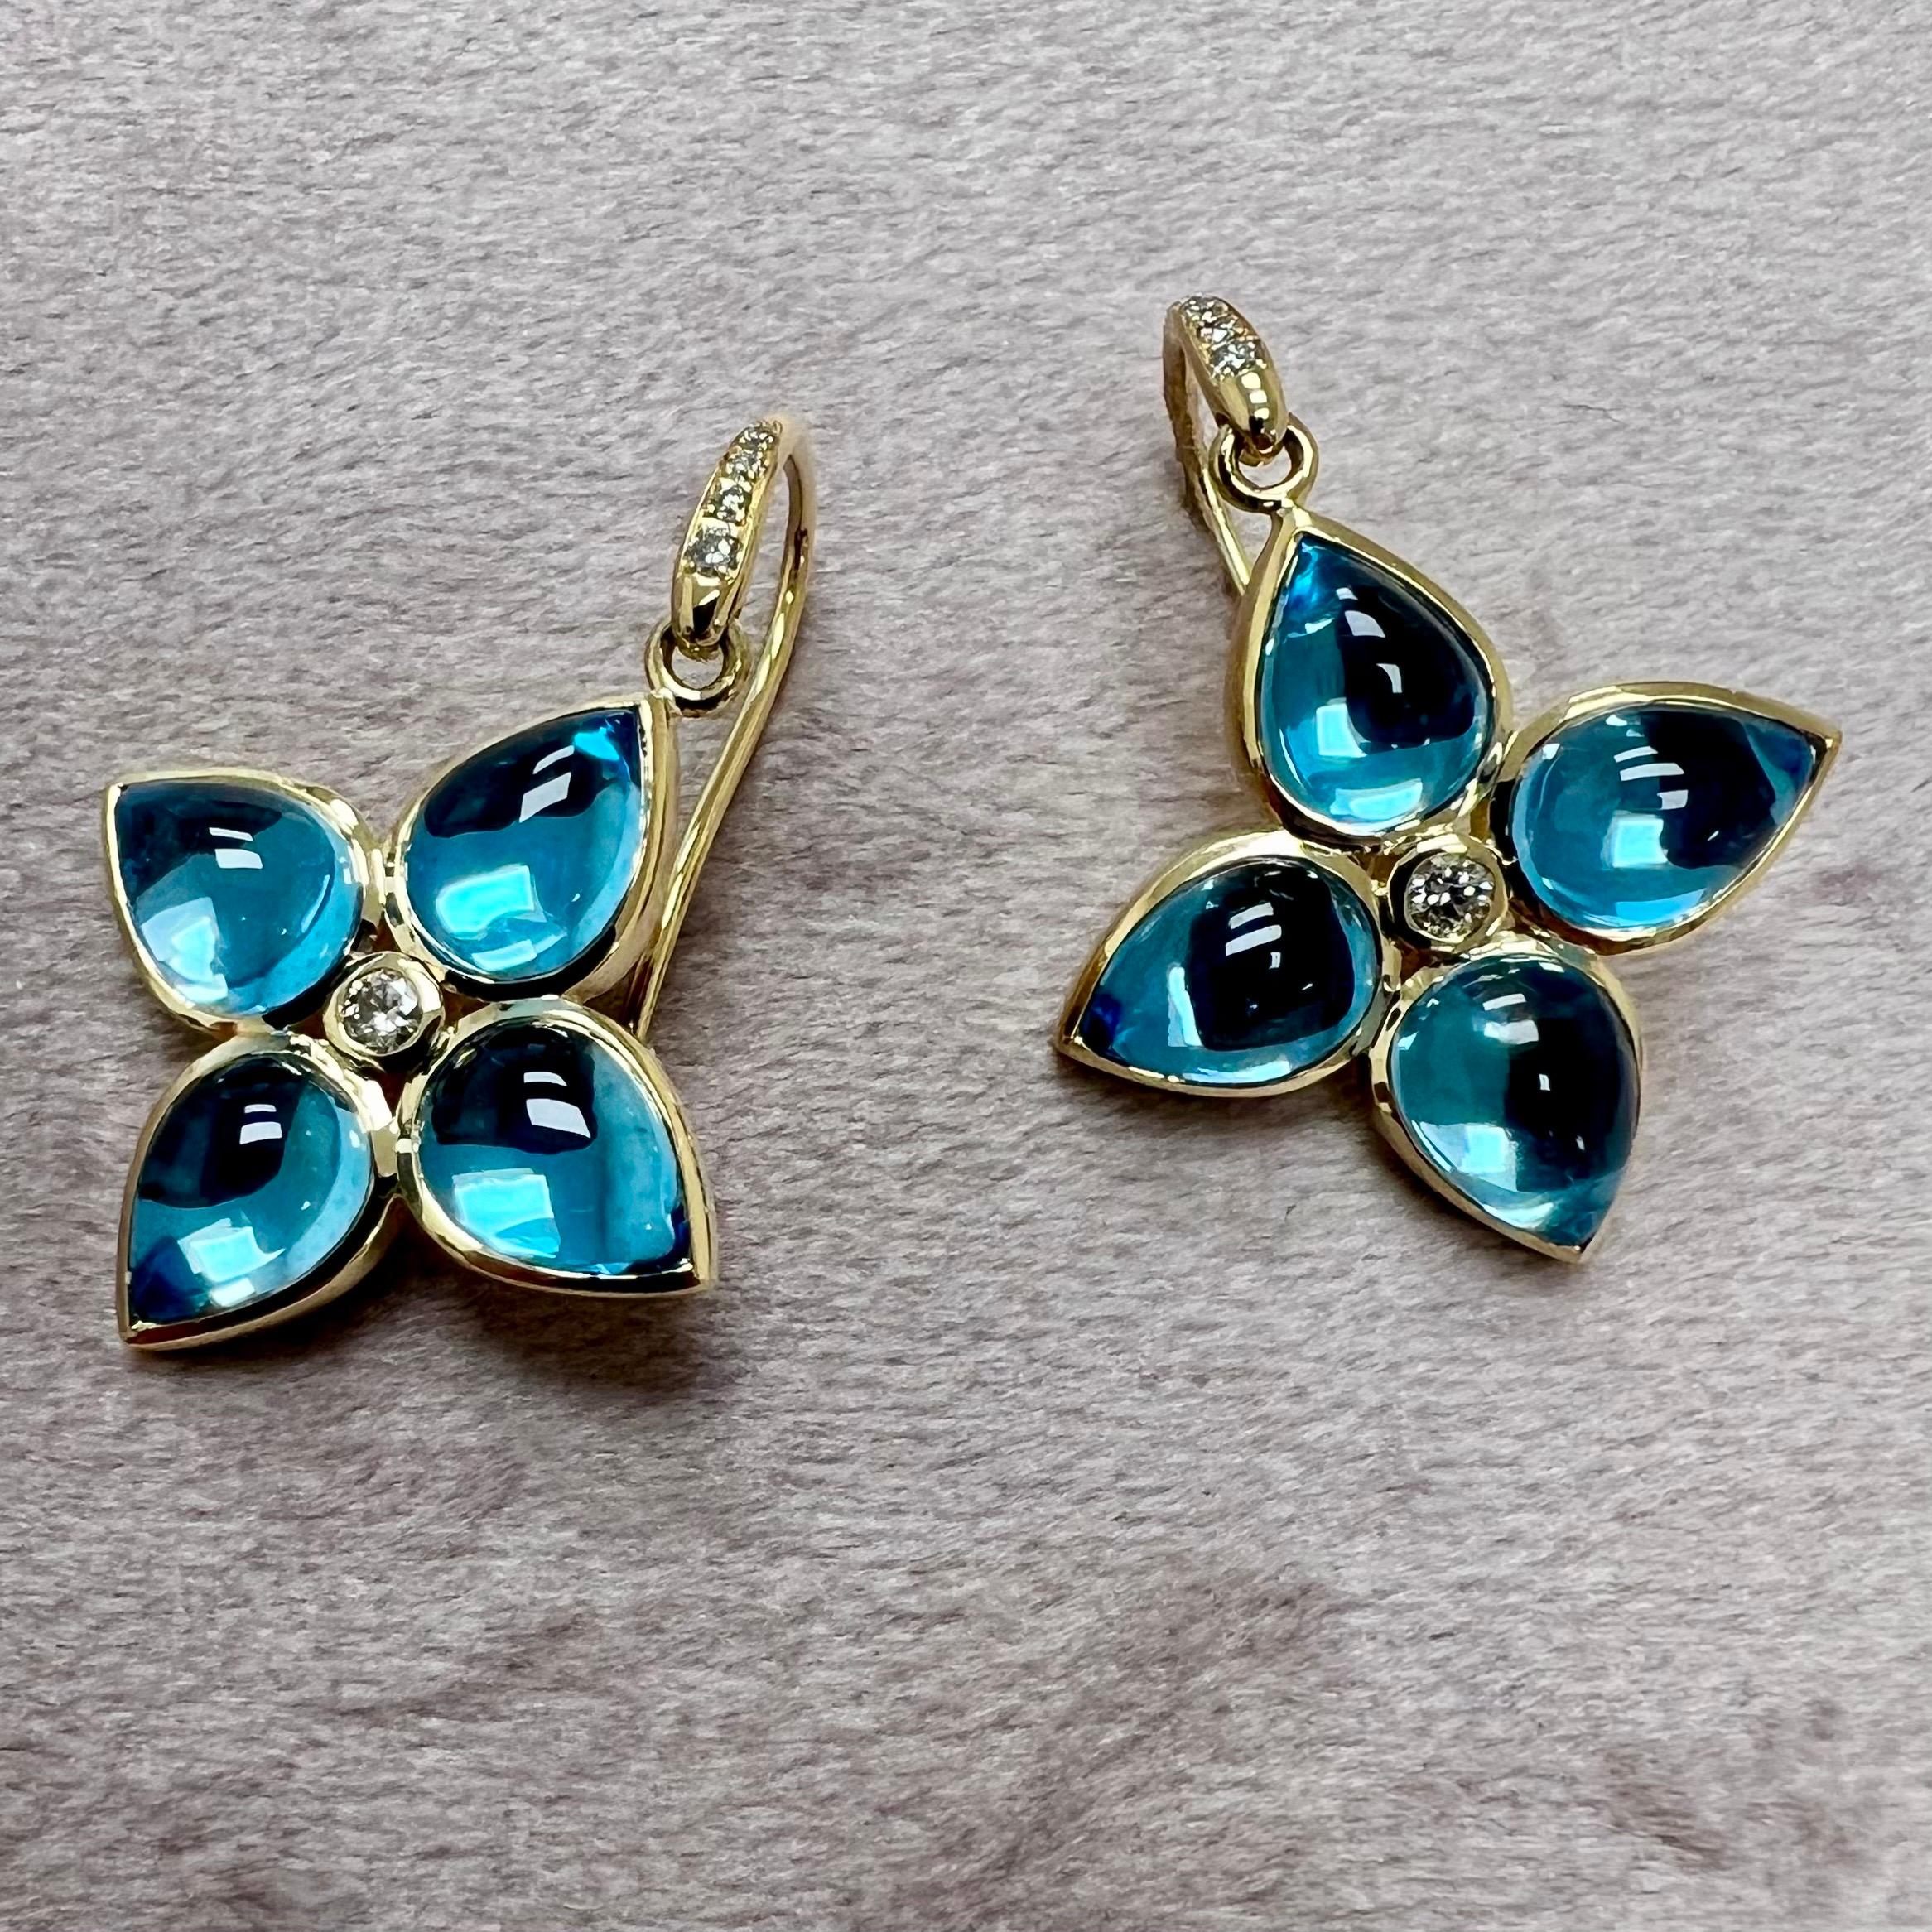 Mixed Cut Syna Yellow Gold Blue Topaz and Diamonds Earrings For Sale